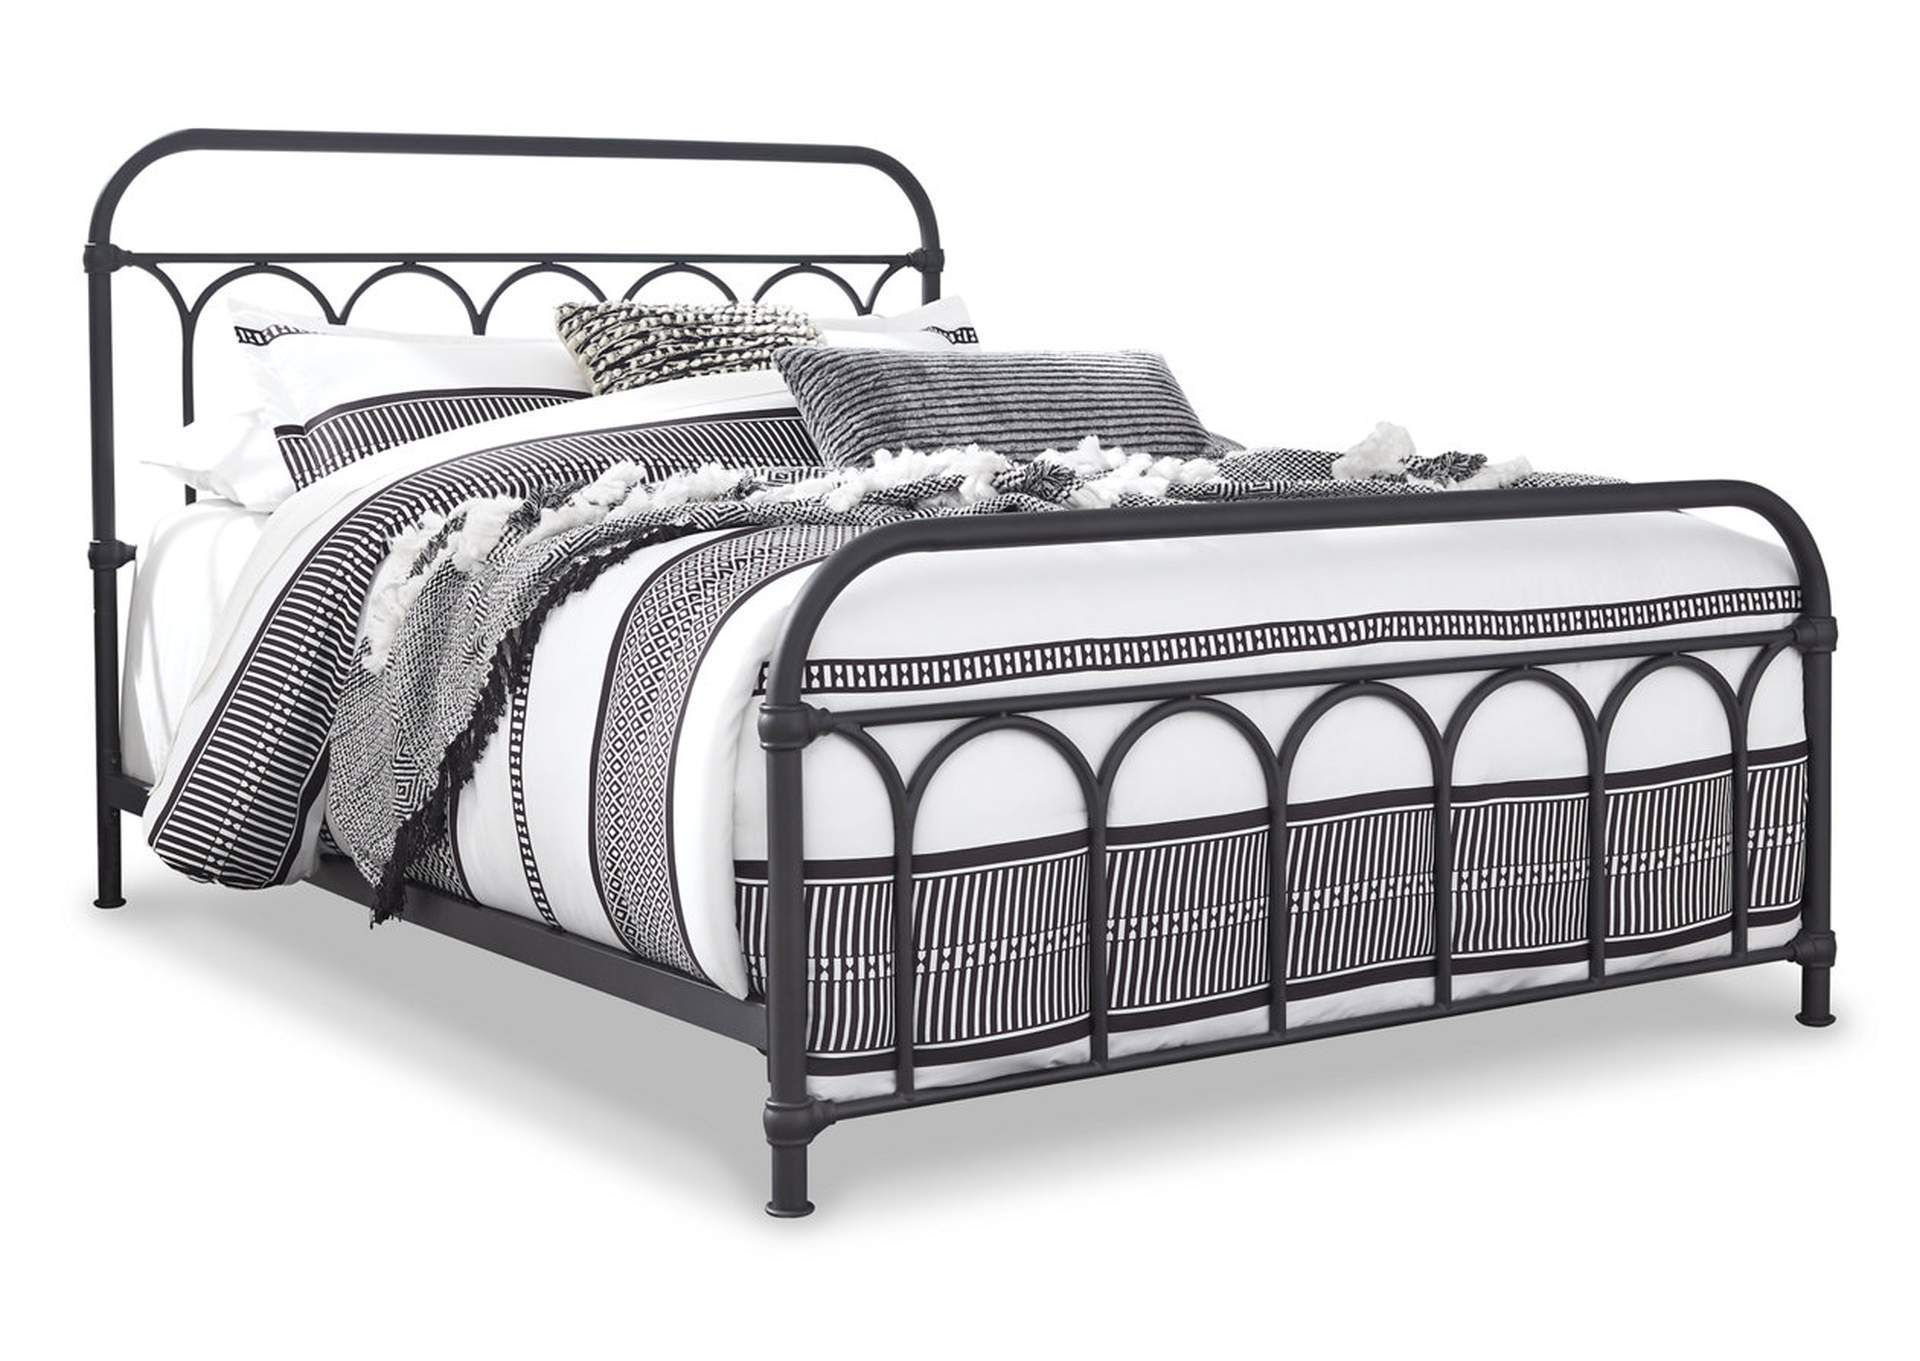 Nashburg Queen Metal Bed,Signature Design By Ashley